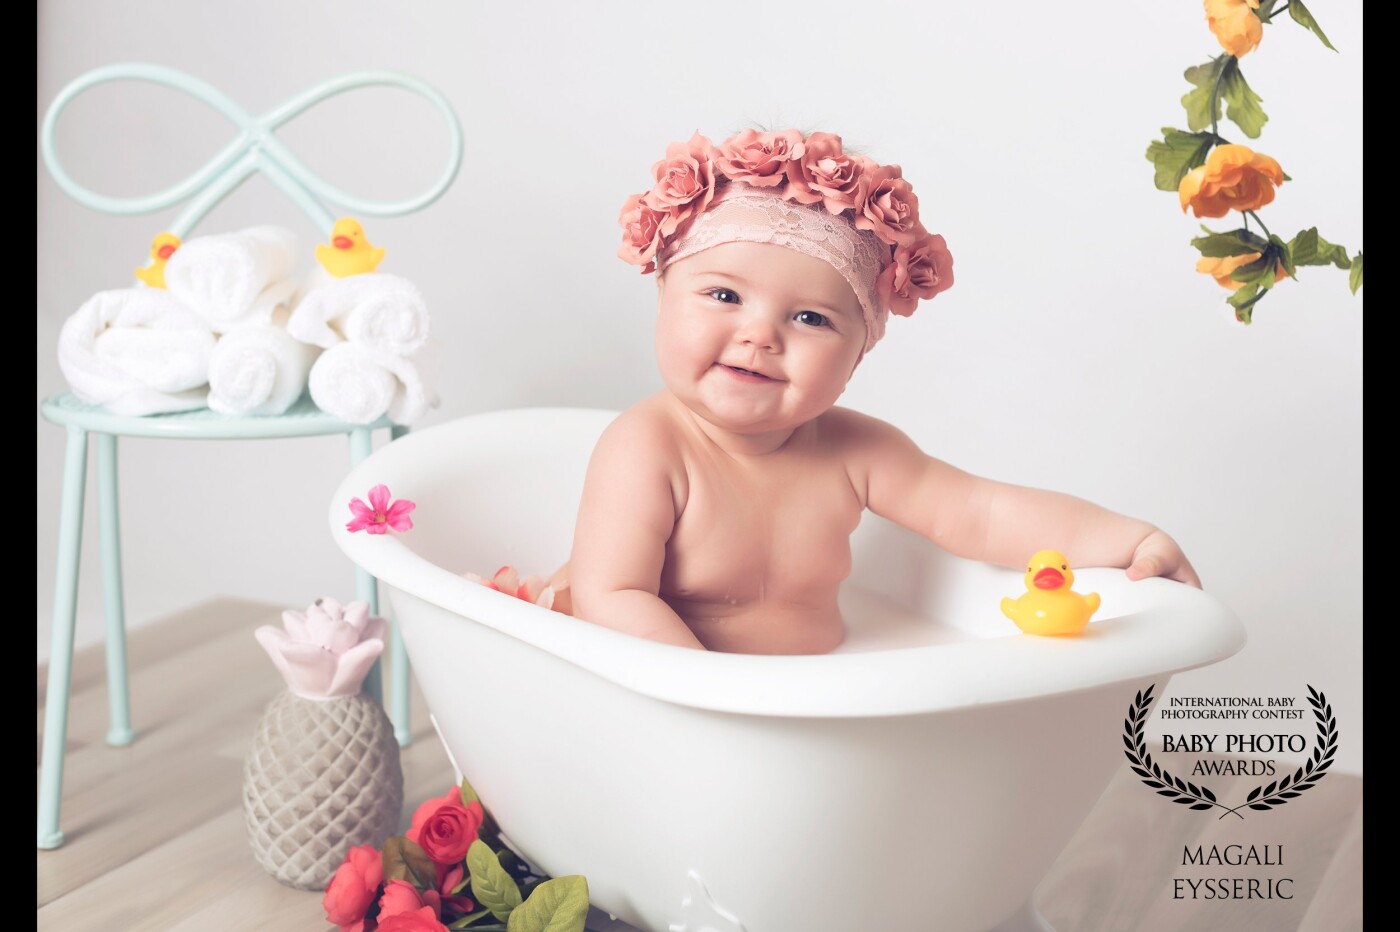 Here is the beautiful louann in his milk bath. At 7 months she is already cracking hearts in her gadsby bath. <br />
This is the third visit in my studio I love her expression and she is very carismatic